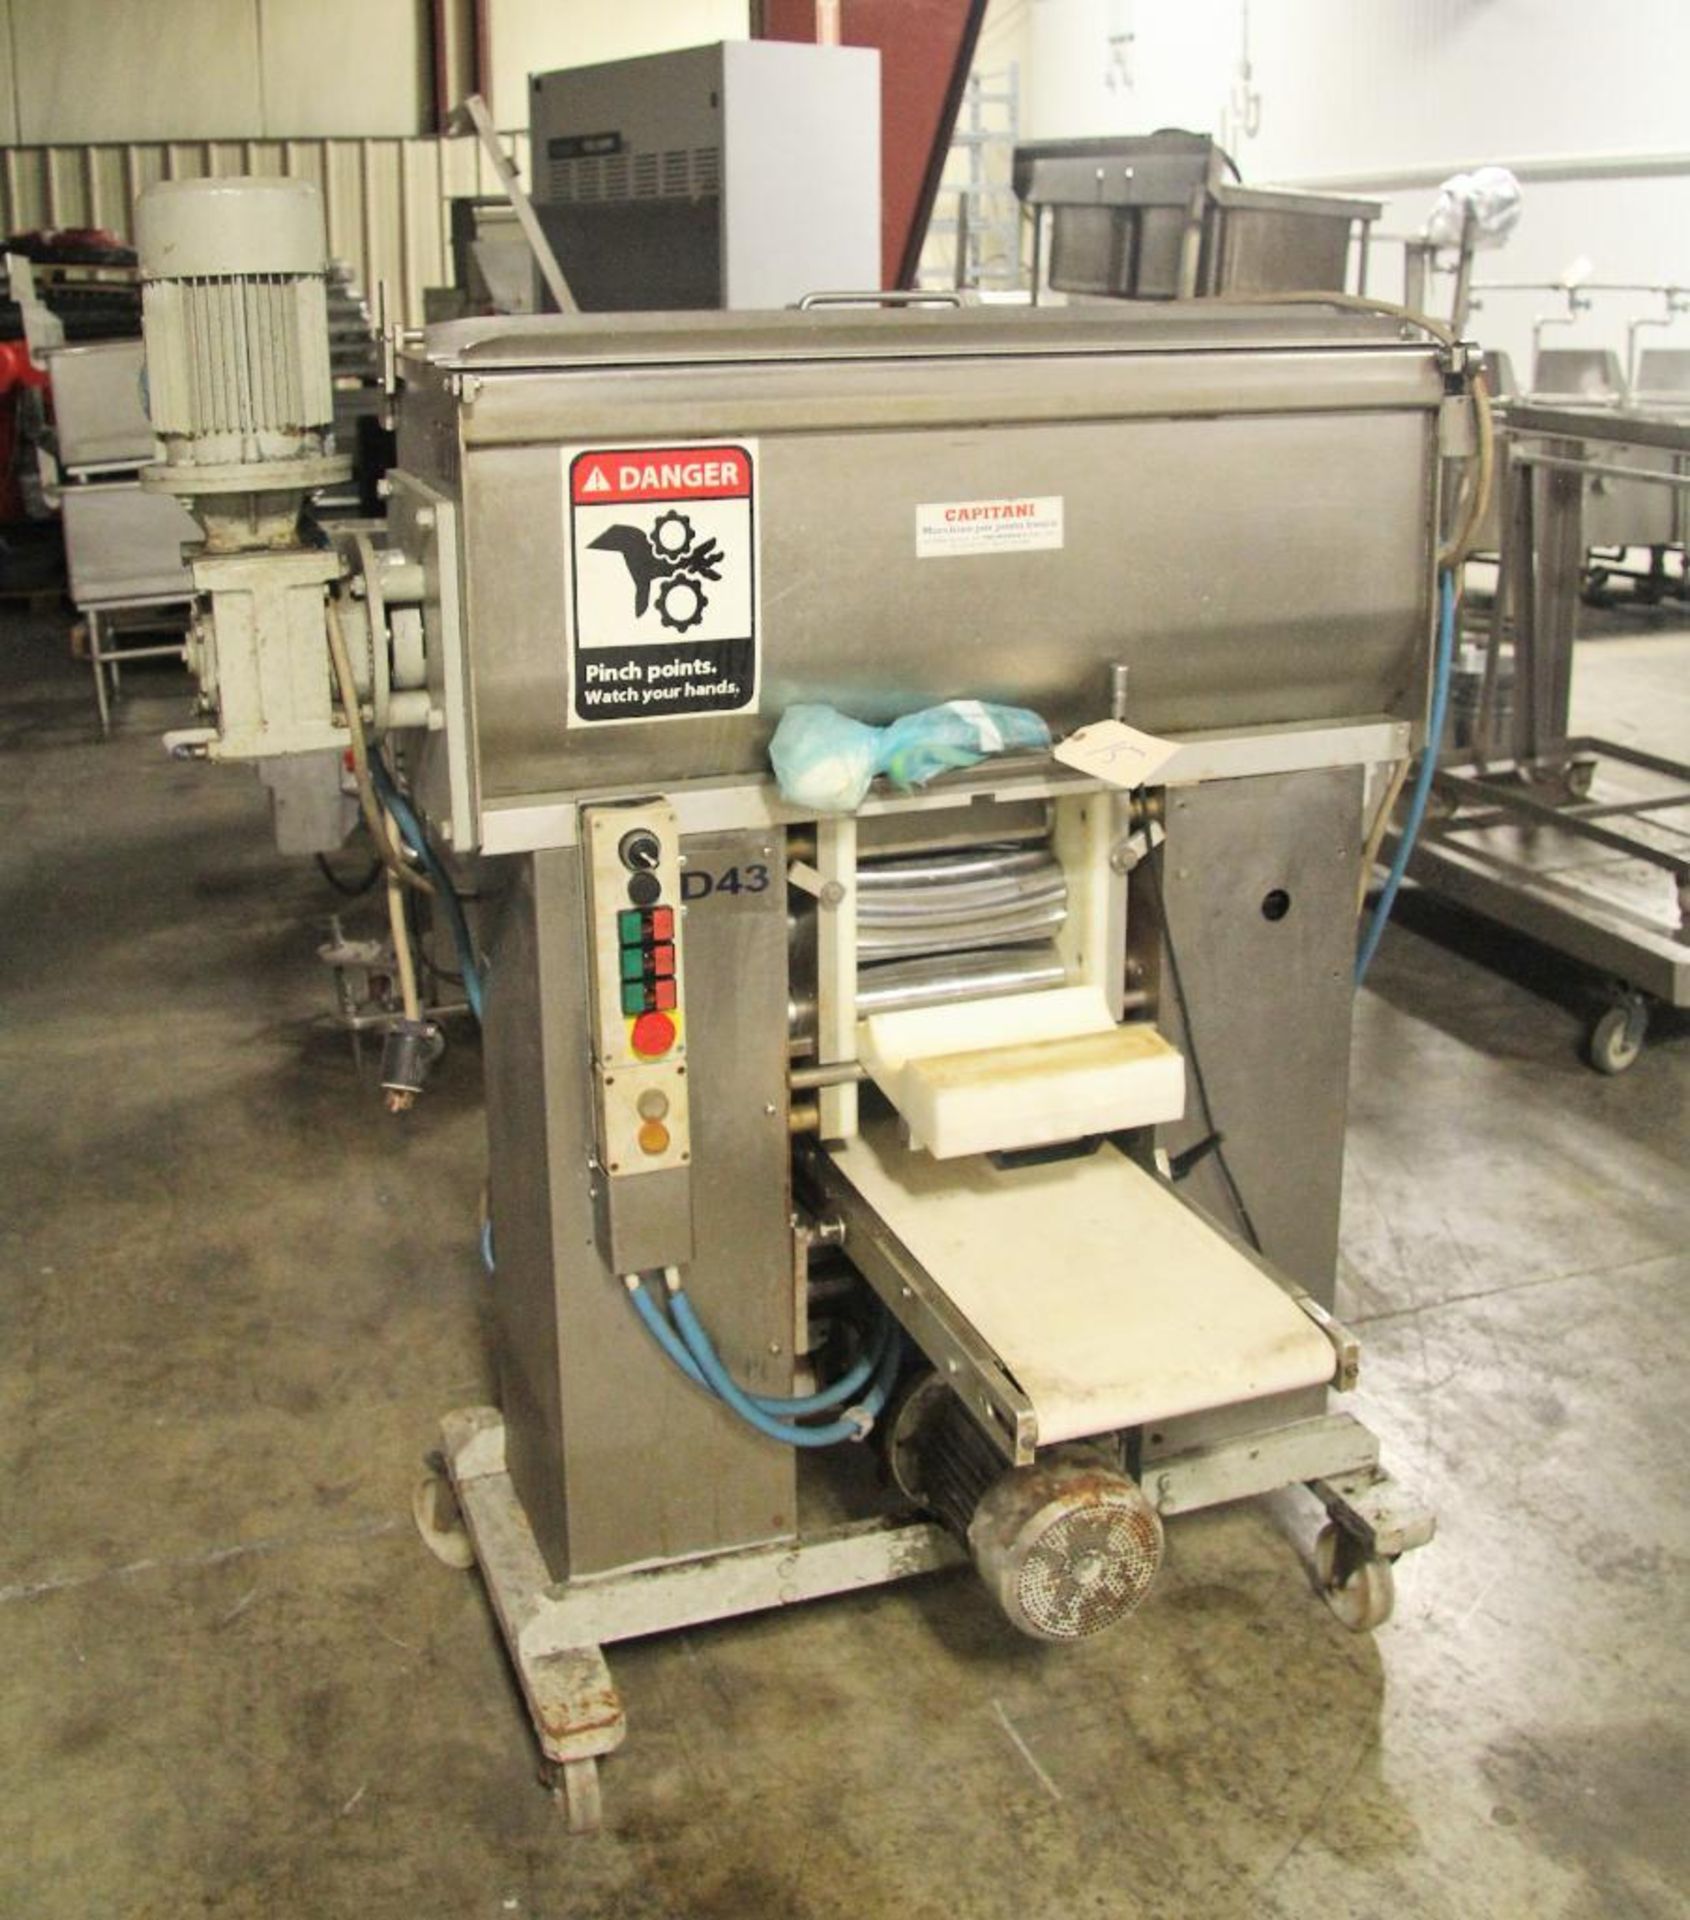 Automatic Pasta Sheeter With Mixer, Top Mounted 38-1/2" Long X 13-1/2" Wide X 16-1/2" Deep Stainless